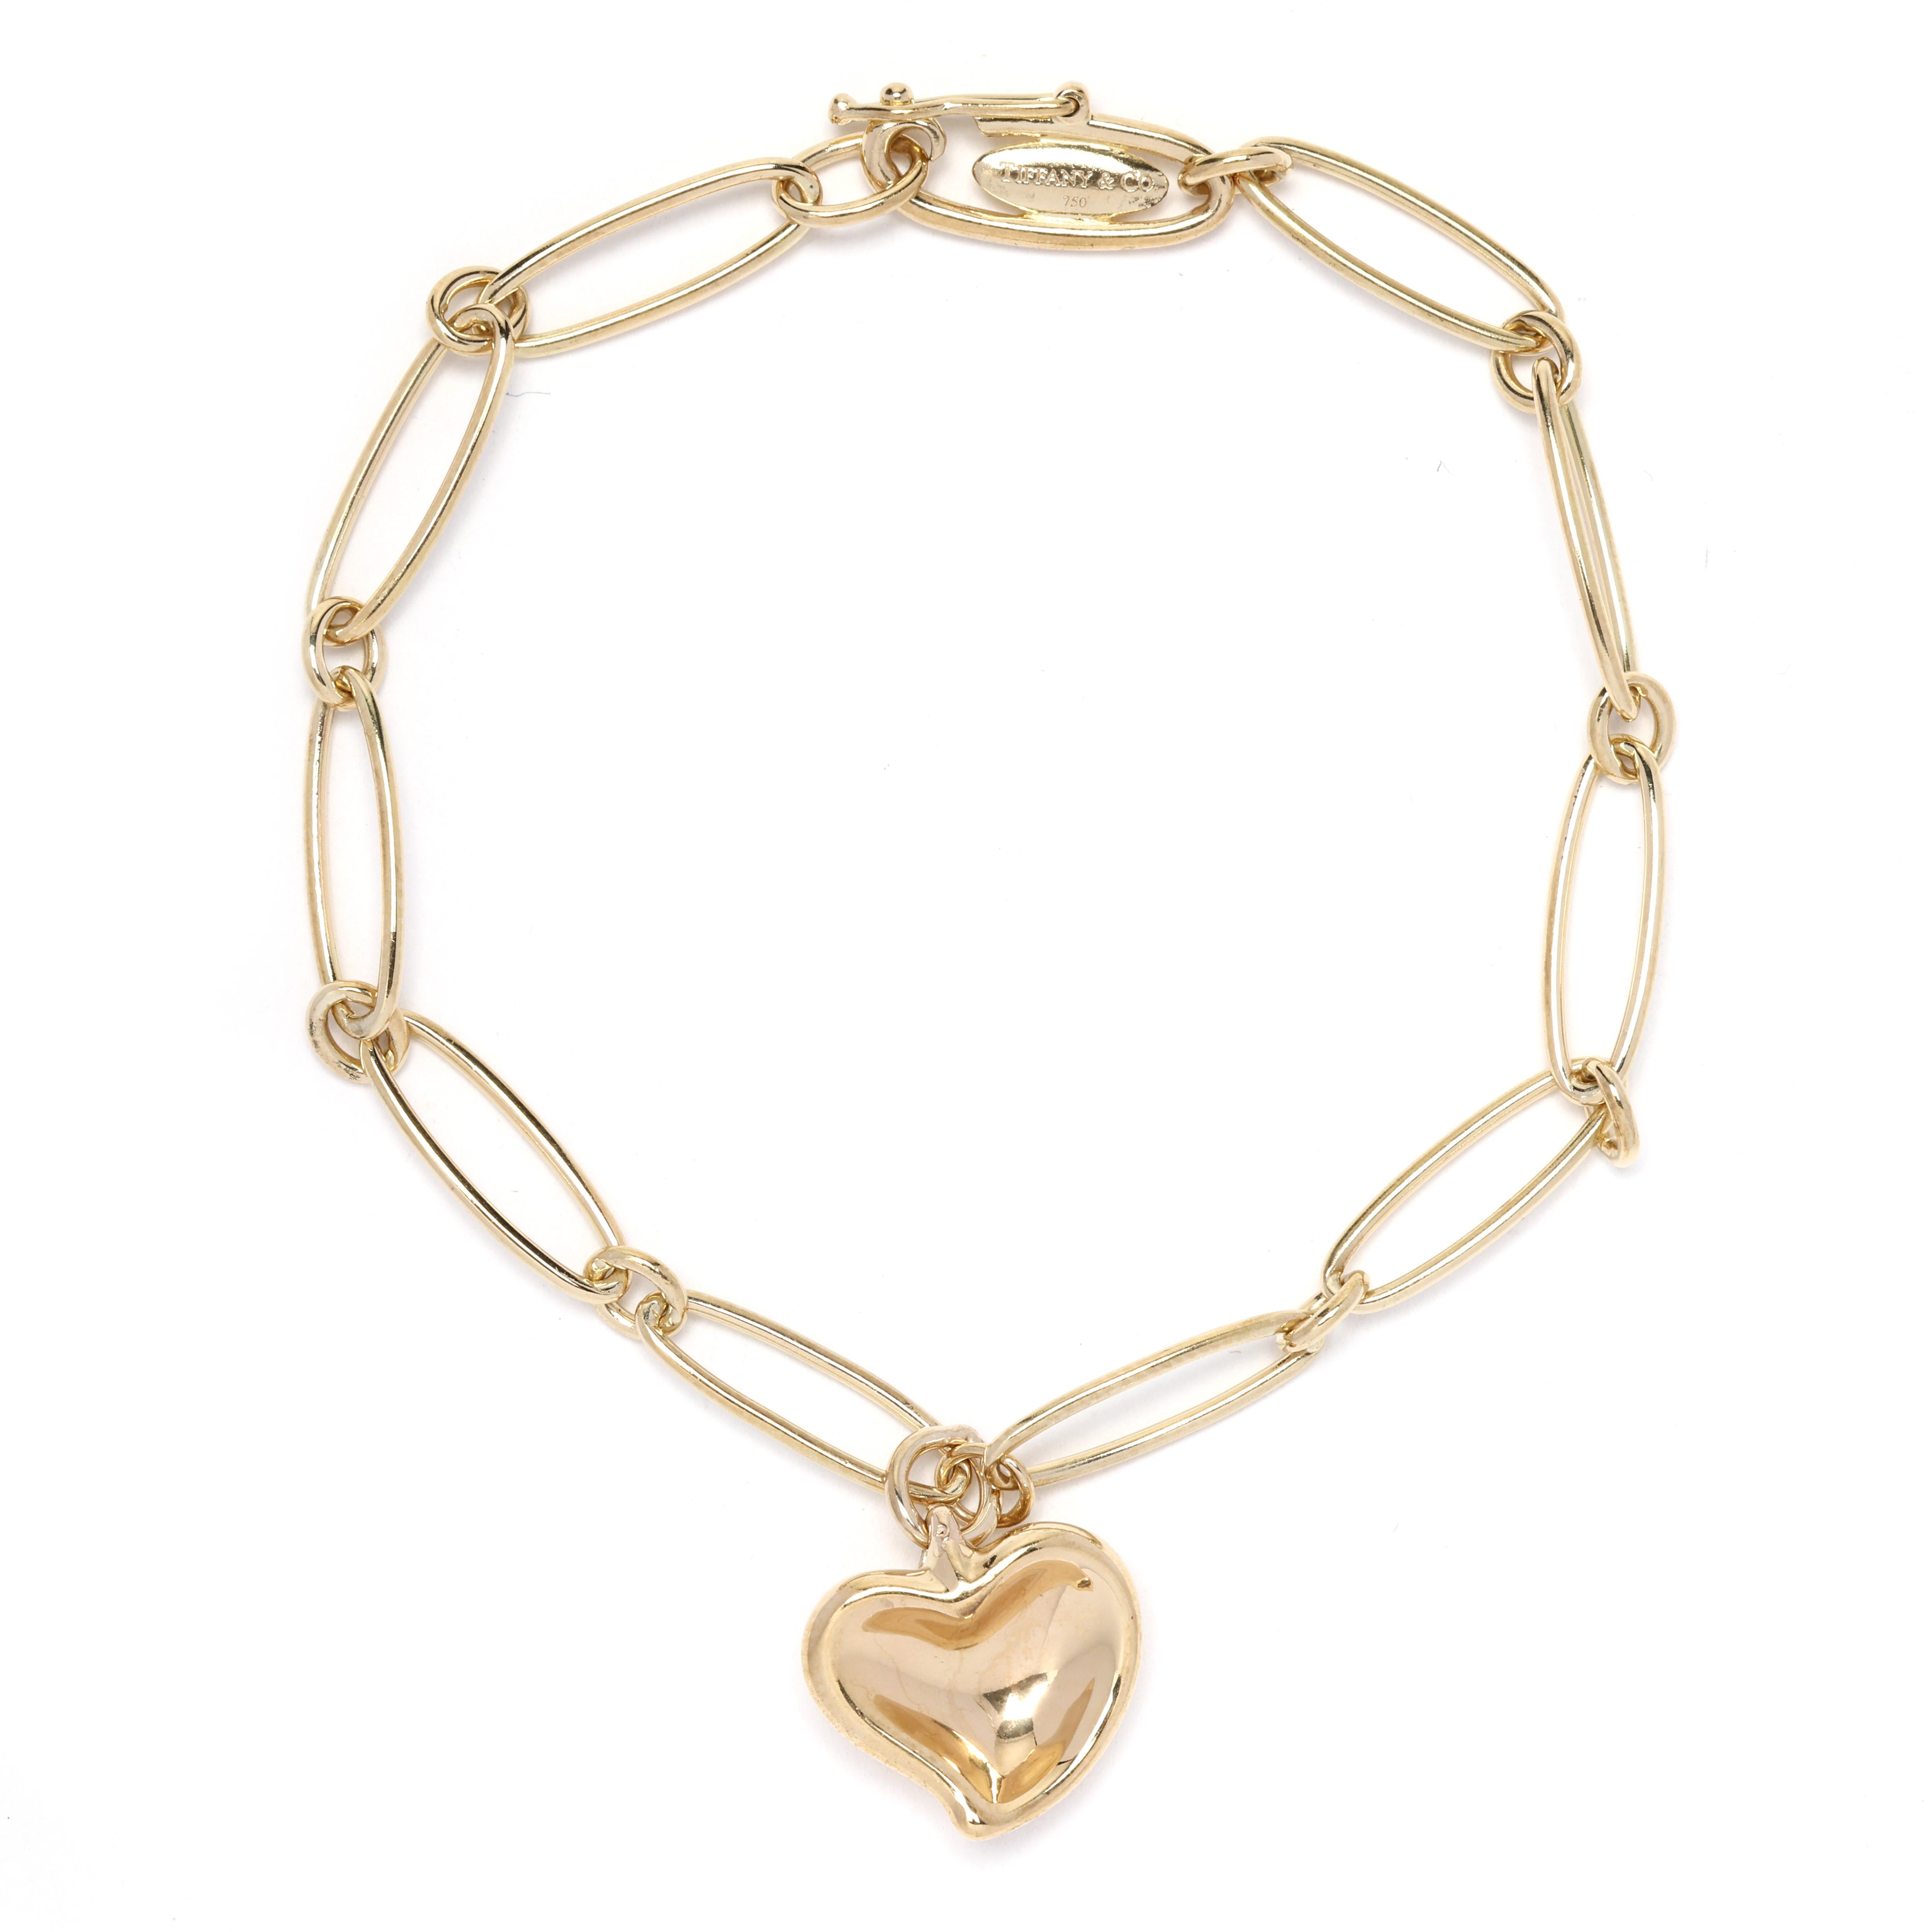 This Tiffany & Co. Elsa Perreti Link Bracelet is crafted in 18k yellow gold and features a delicate heart pendant. The bracelet measures 7.5 inches in length, making it the perfect size for everyday wear. The Elsa Perreti design is known for its